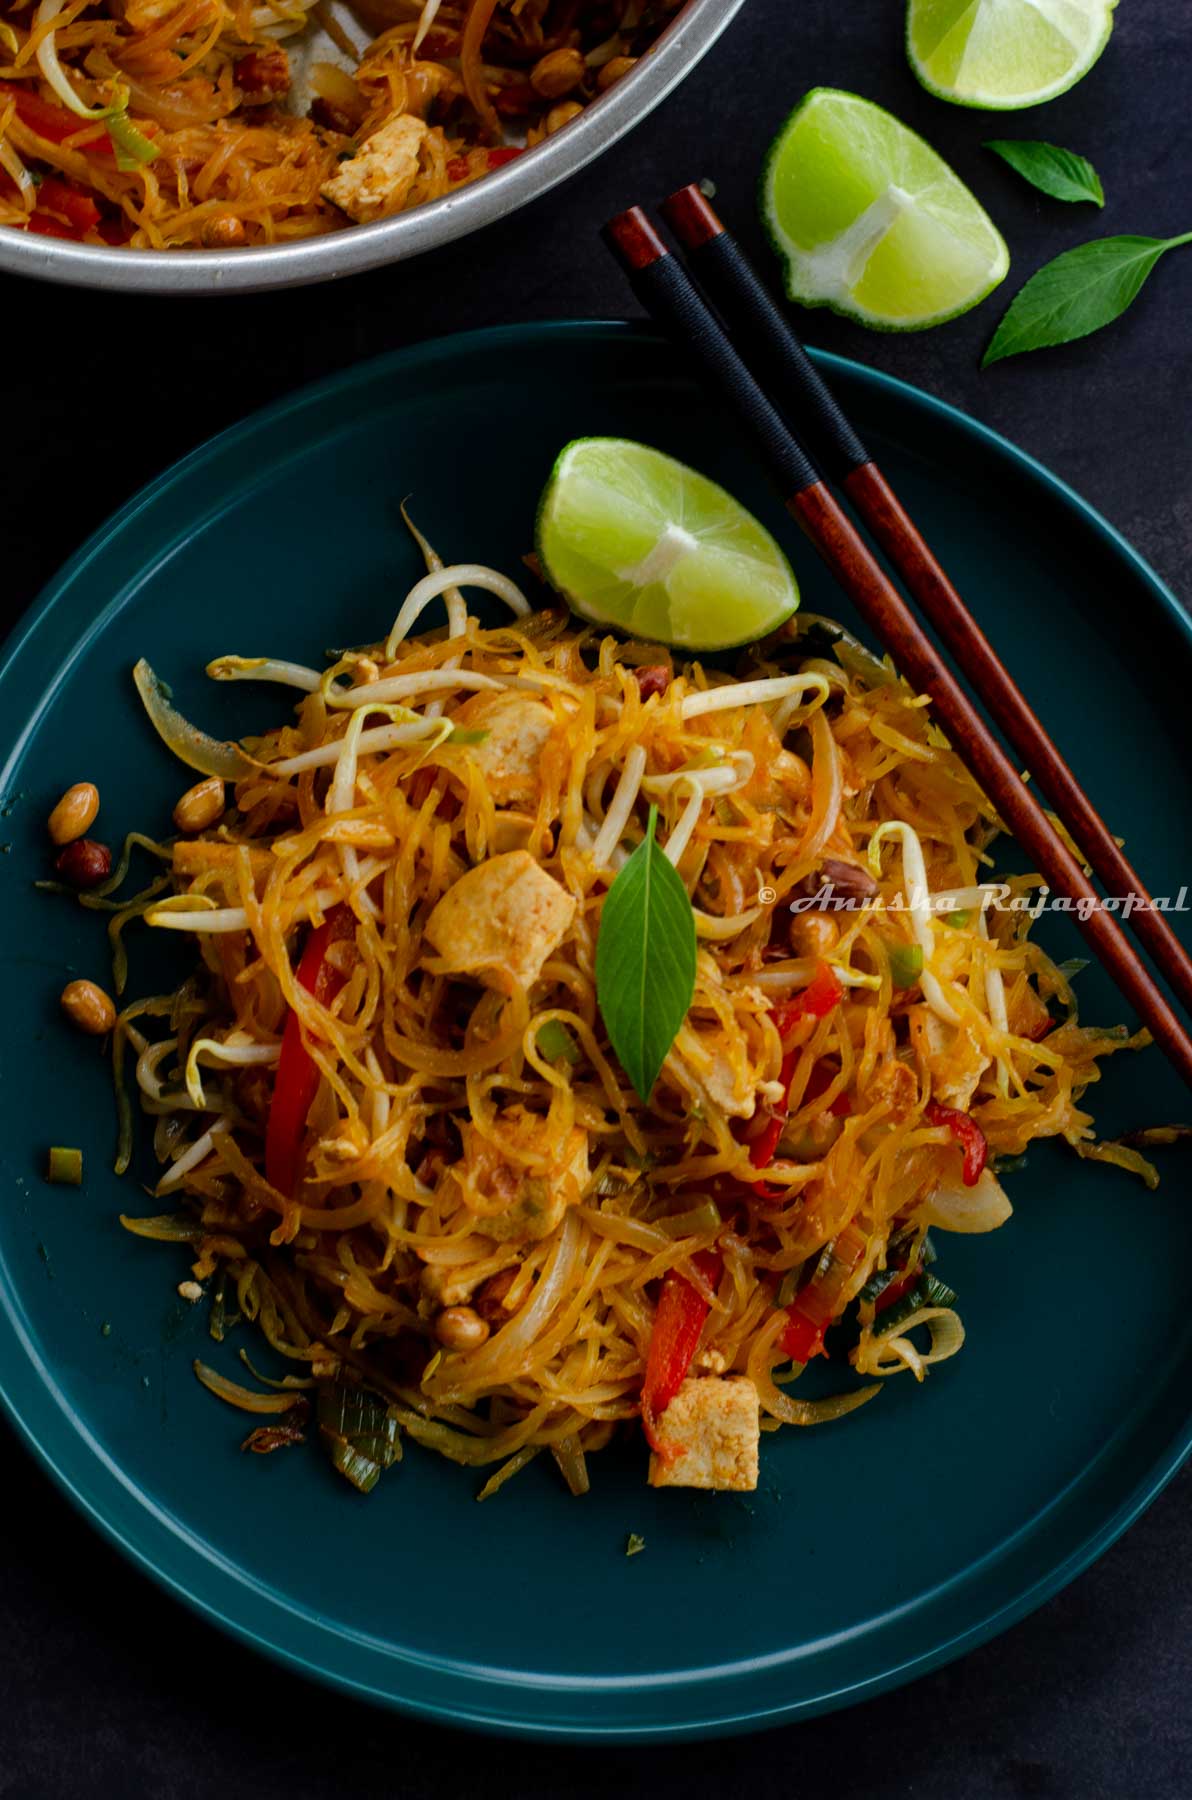 Spaghetti Squash Pad Thai served on a teal blue plate with a lime wedge and chopsticks